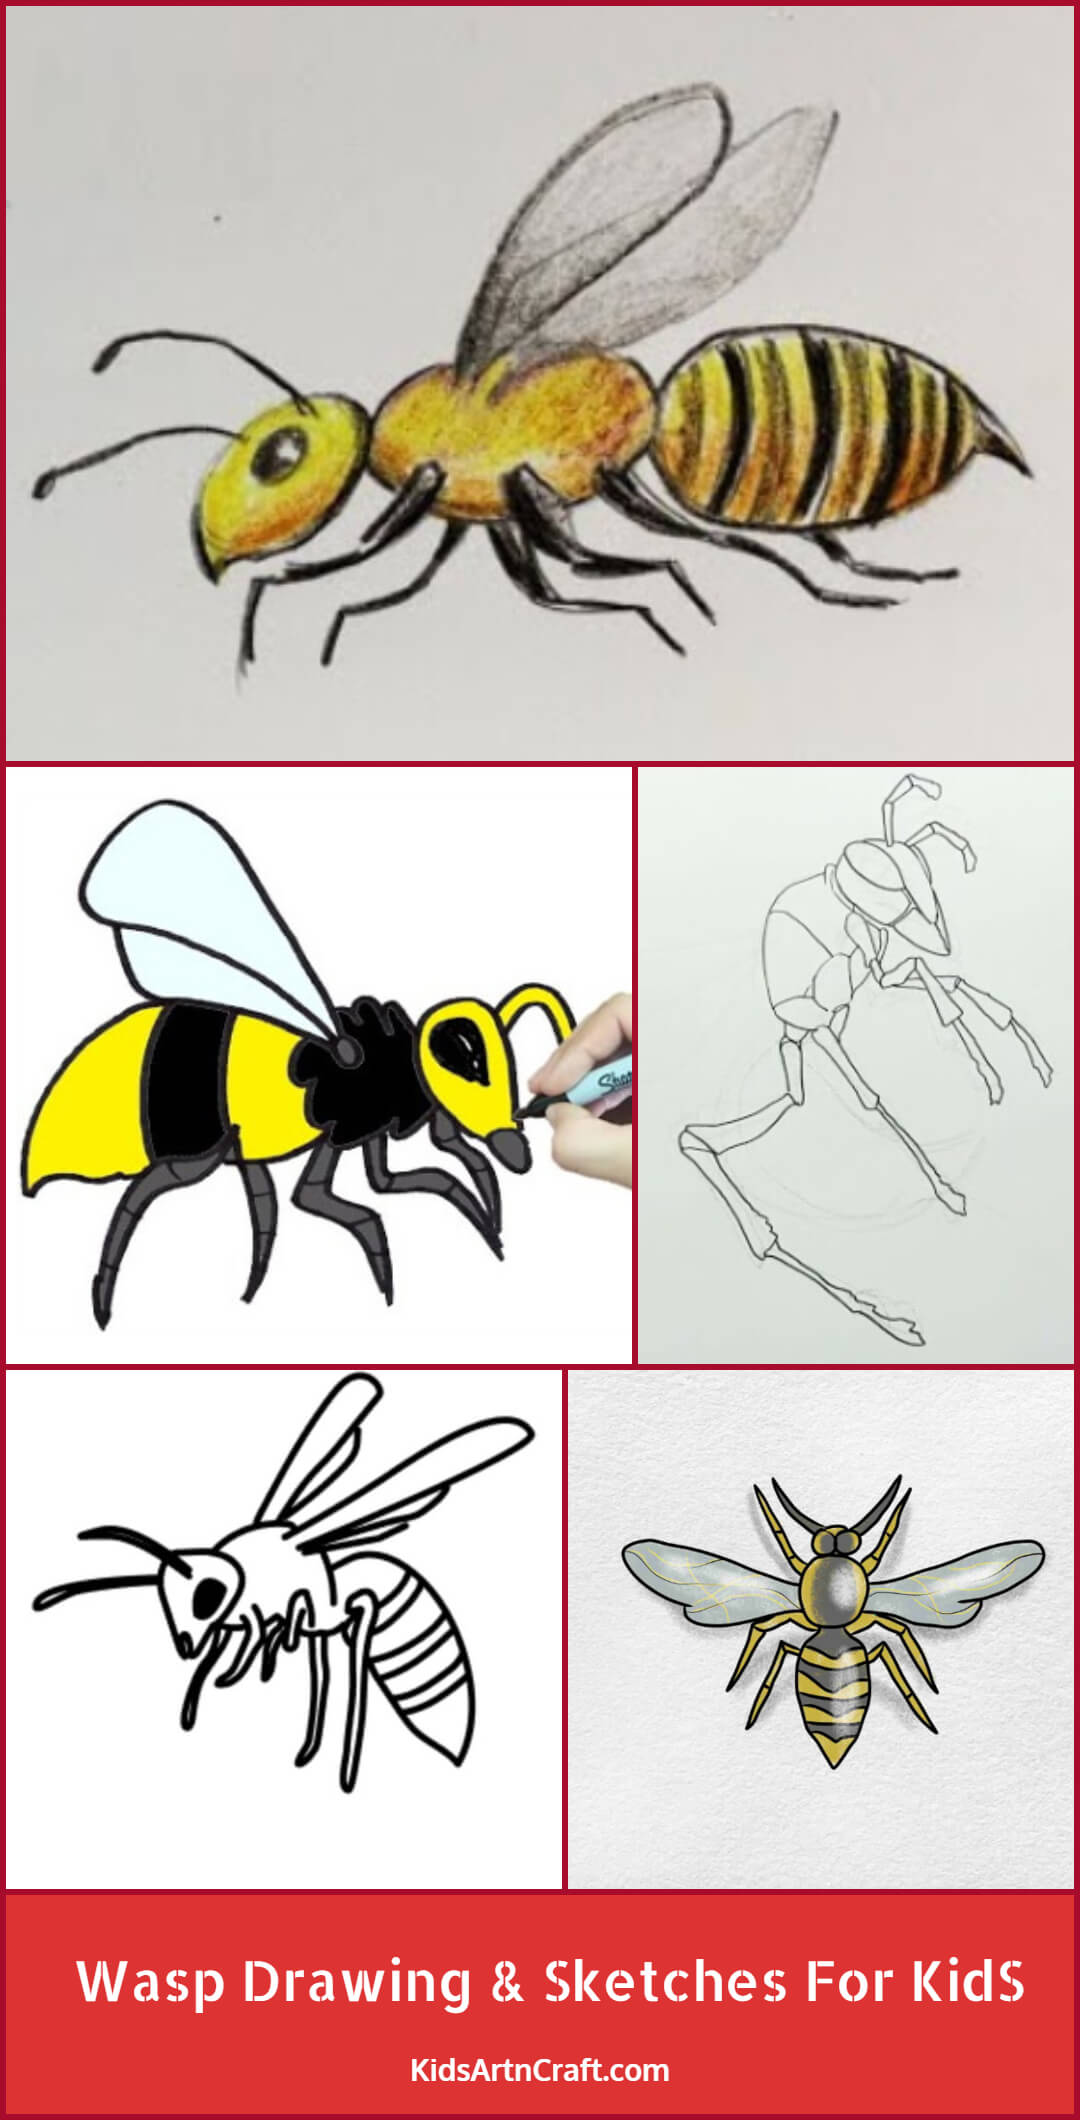 Wasp Drawing & Sketches For Kids